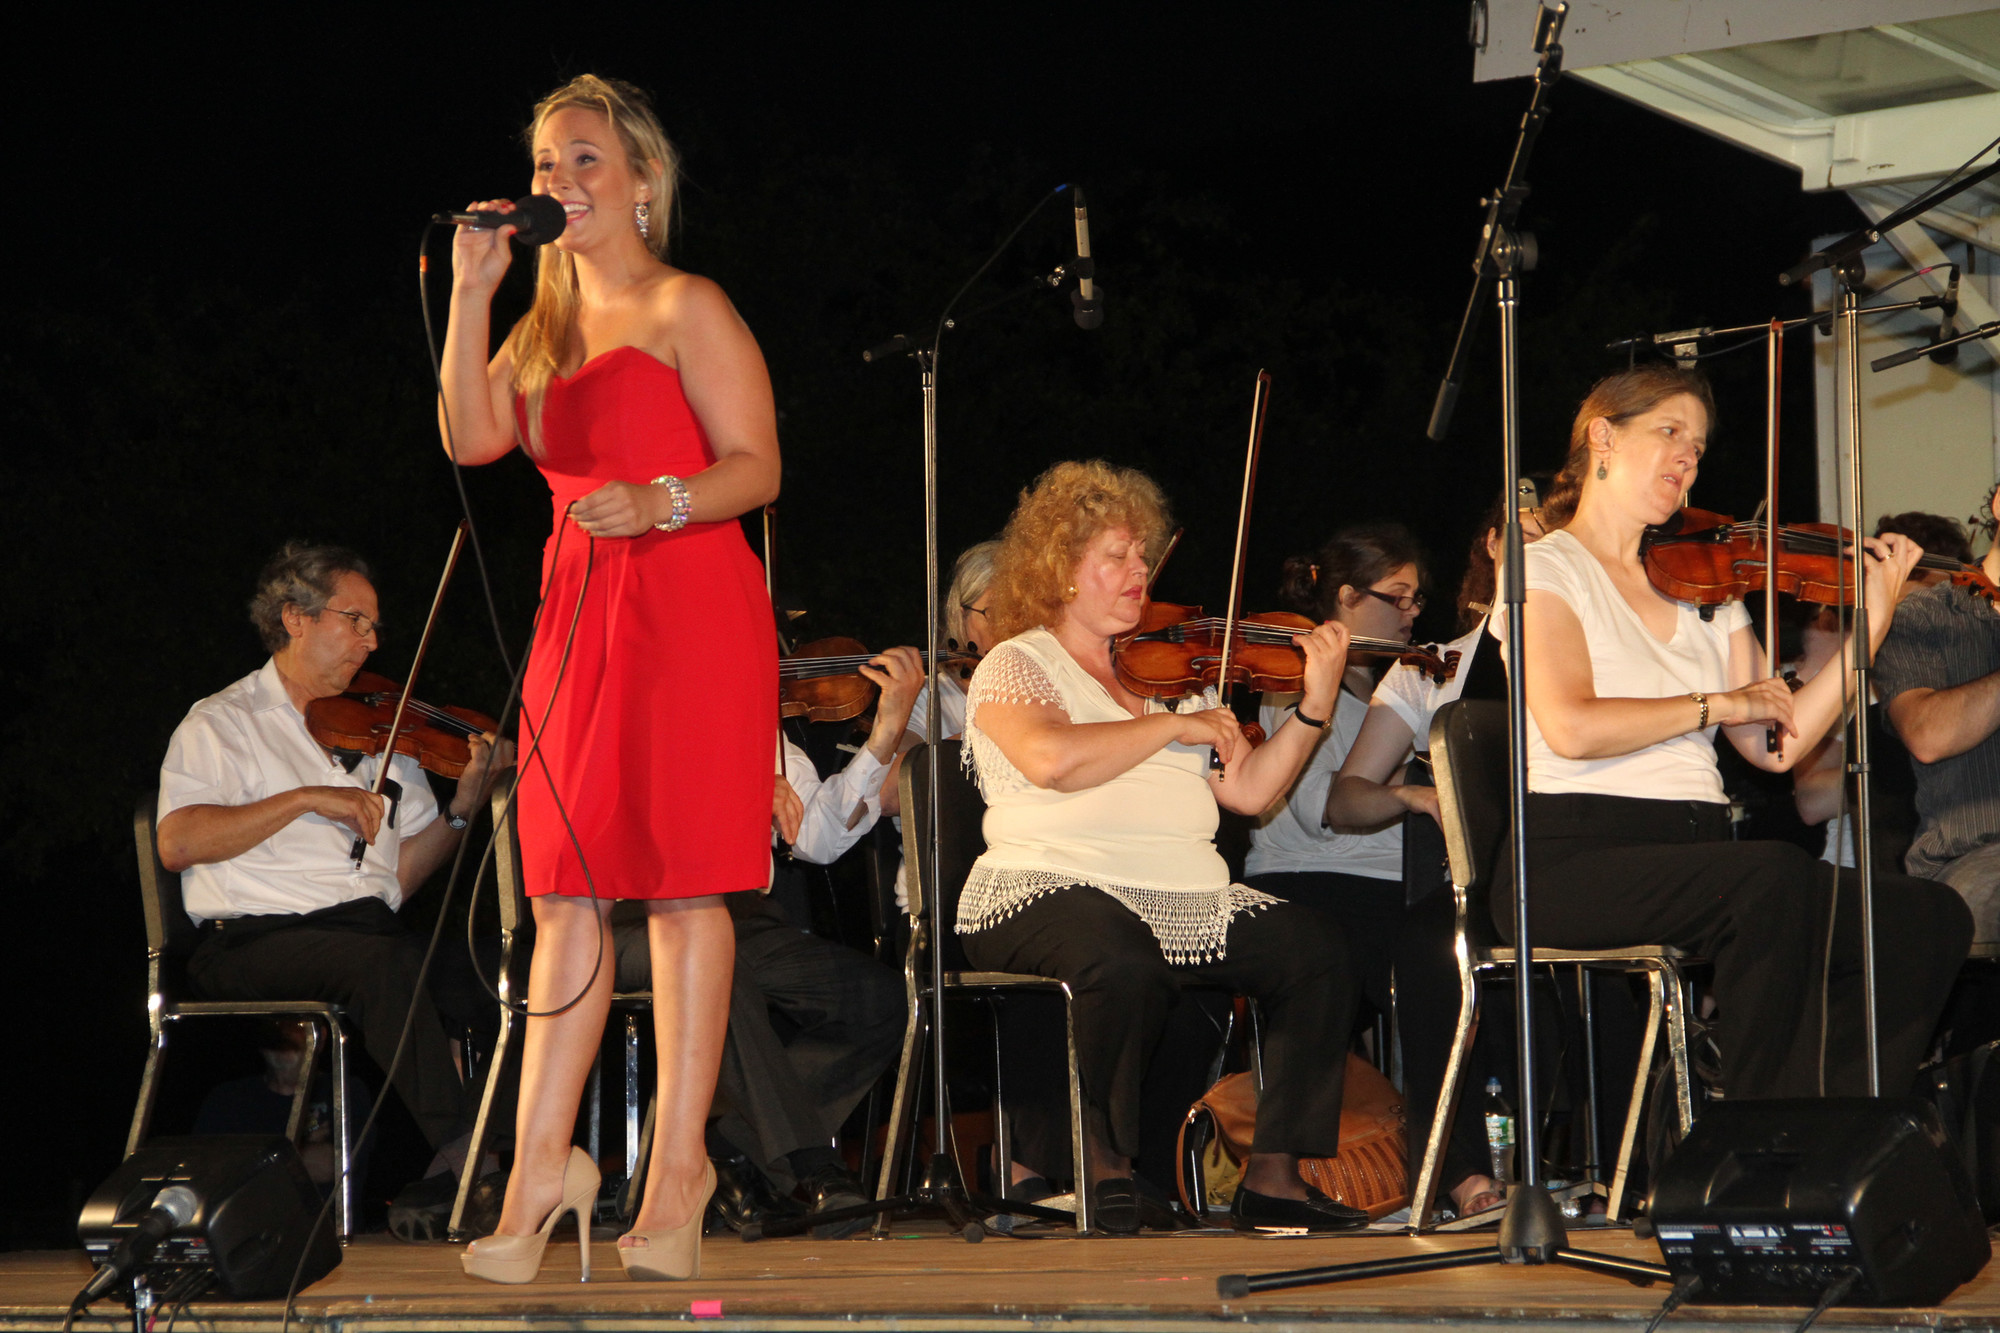 Alexa Green was a guest vocalist, singing with the South Shore Symphony Orchestra.